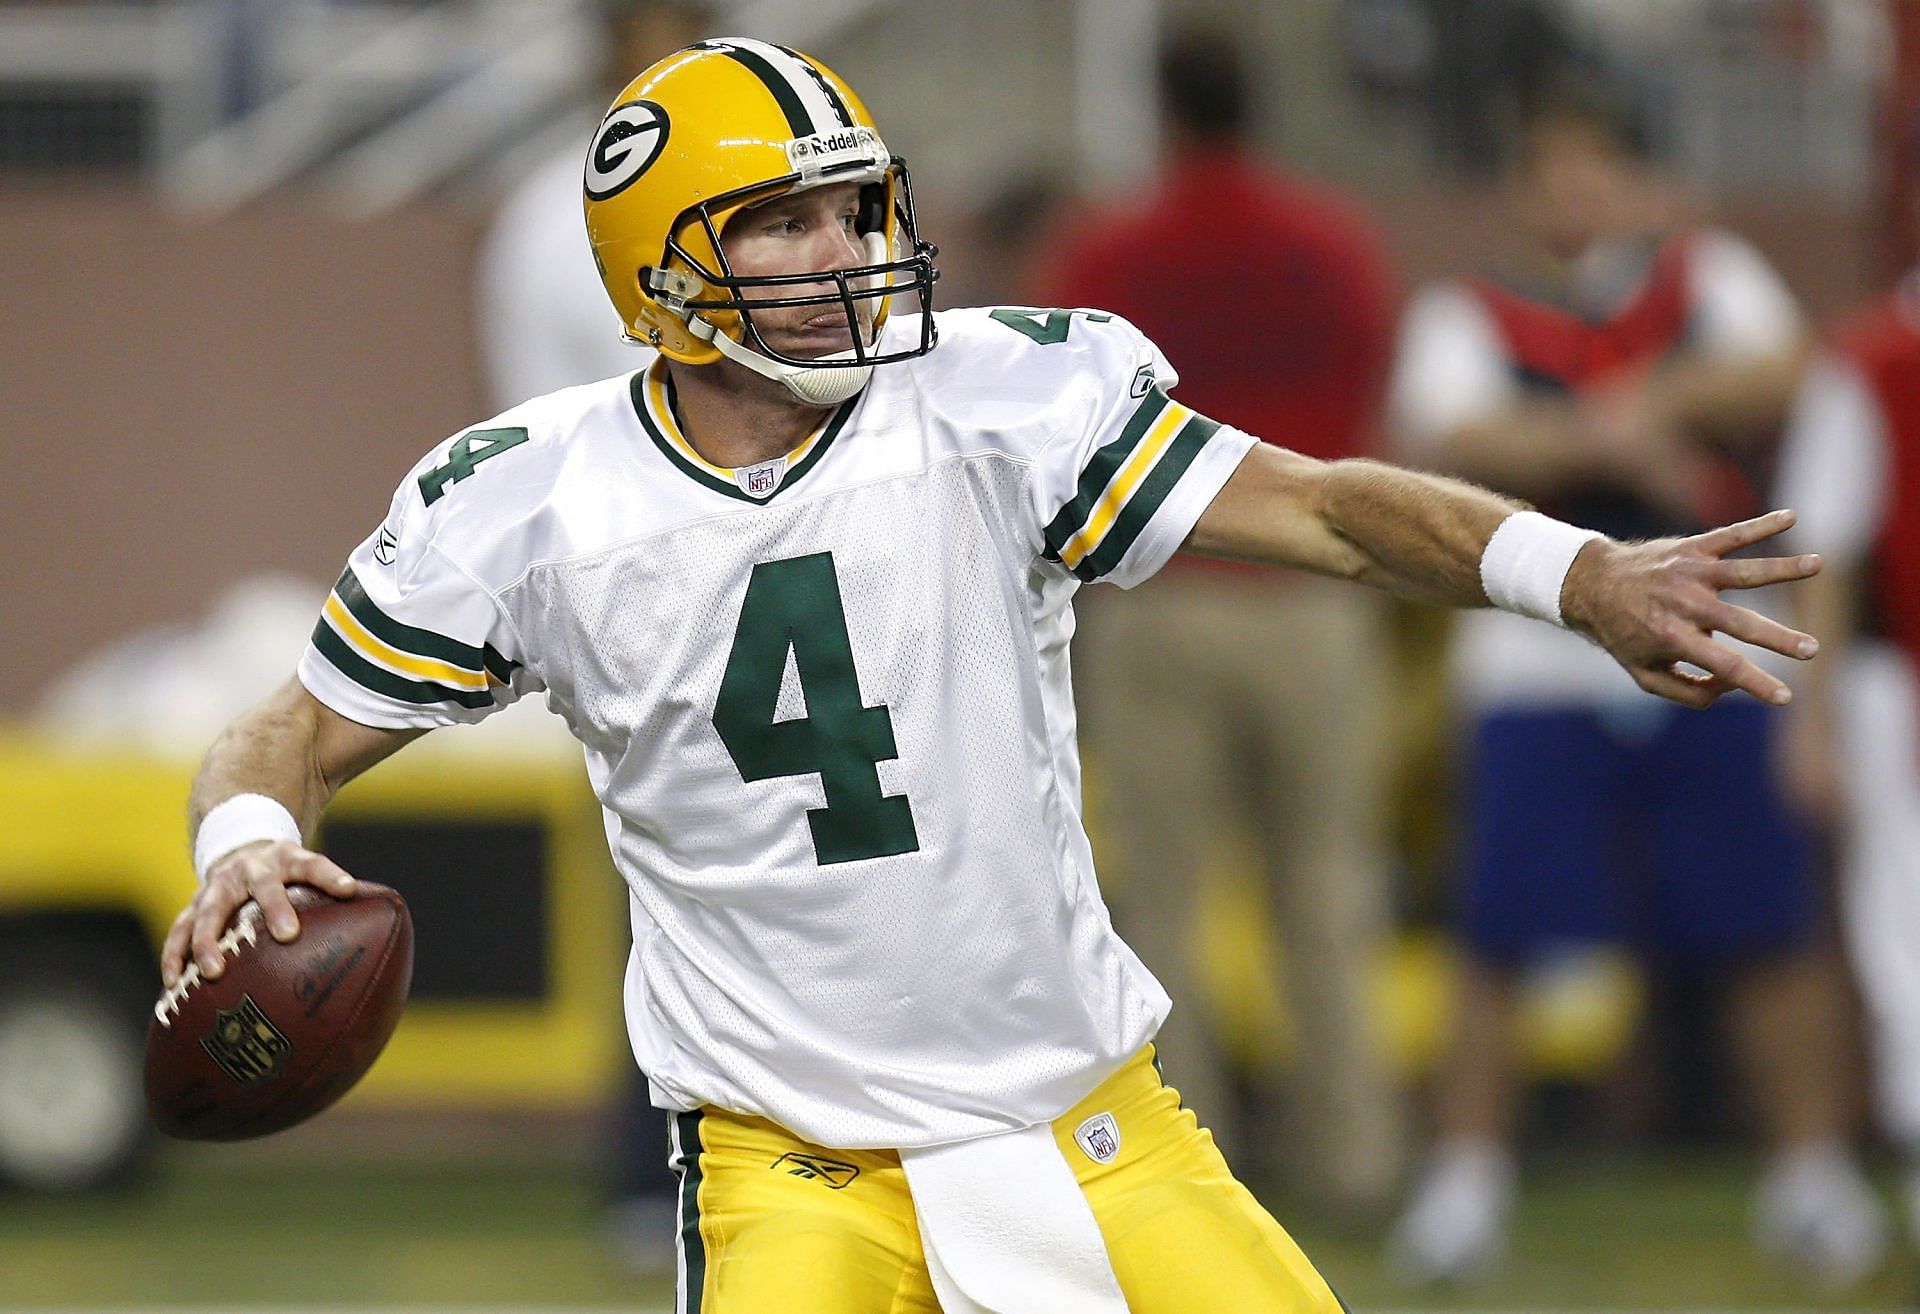 Brett Favre won just one Super Bowl but he made it count in 1996